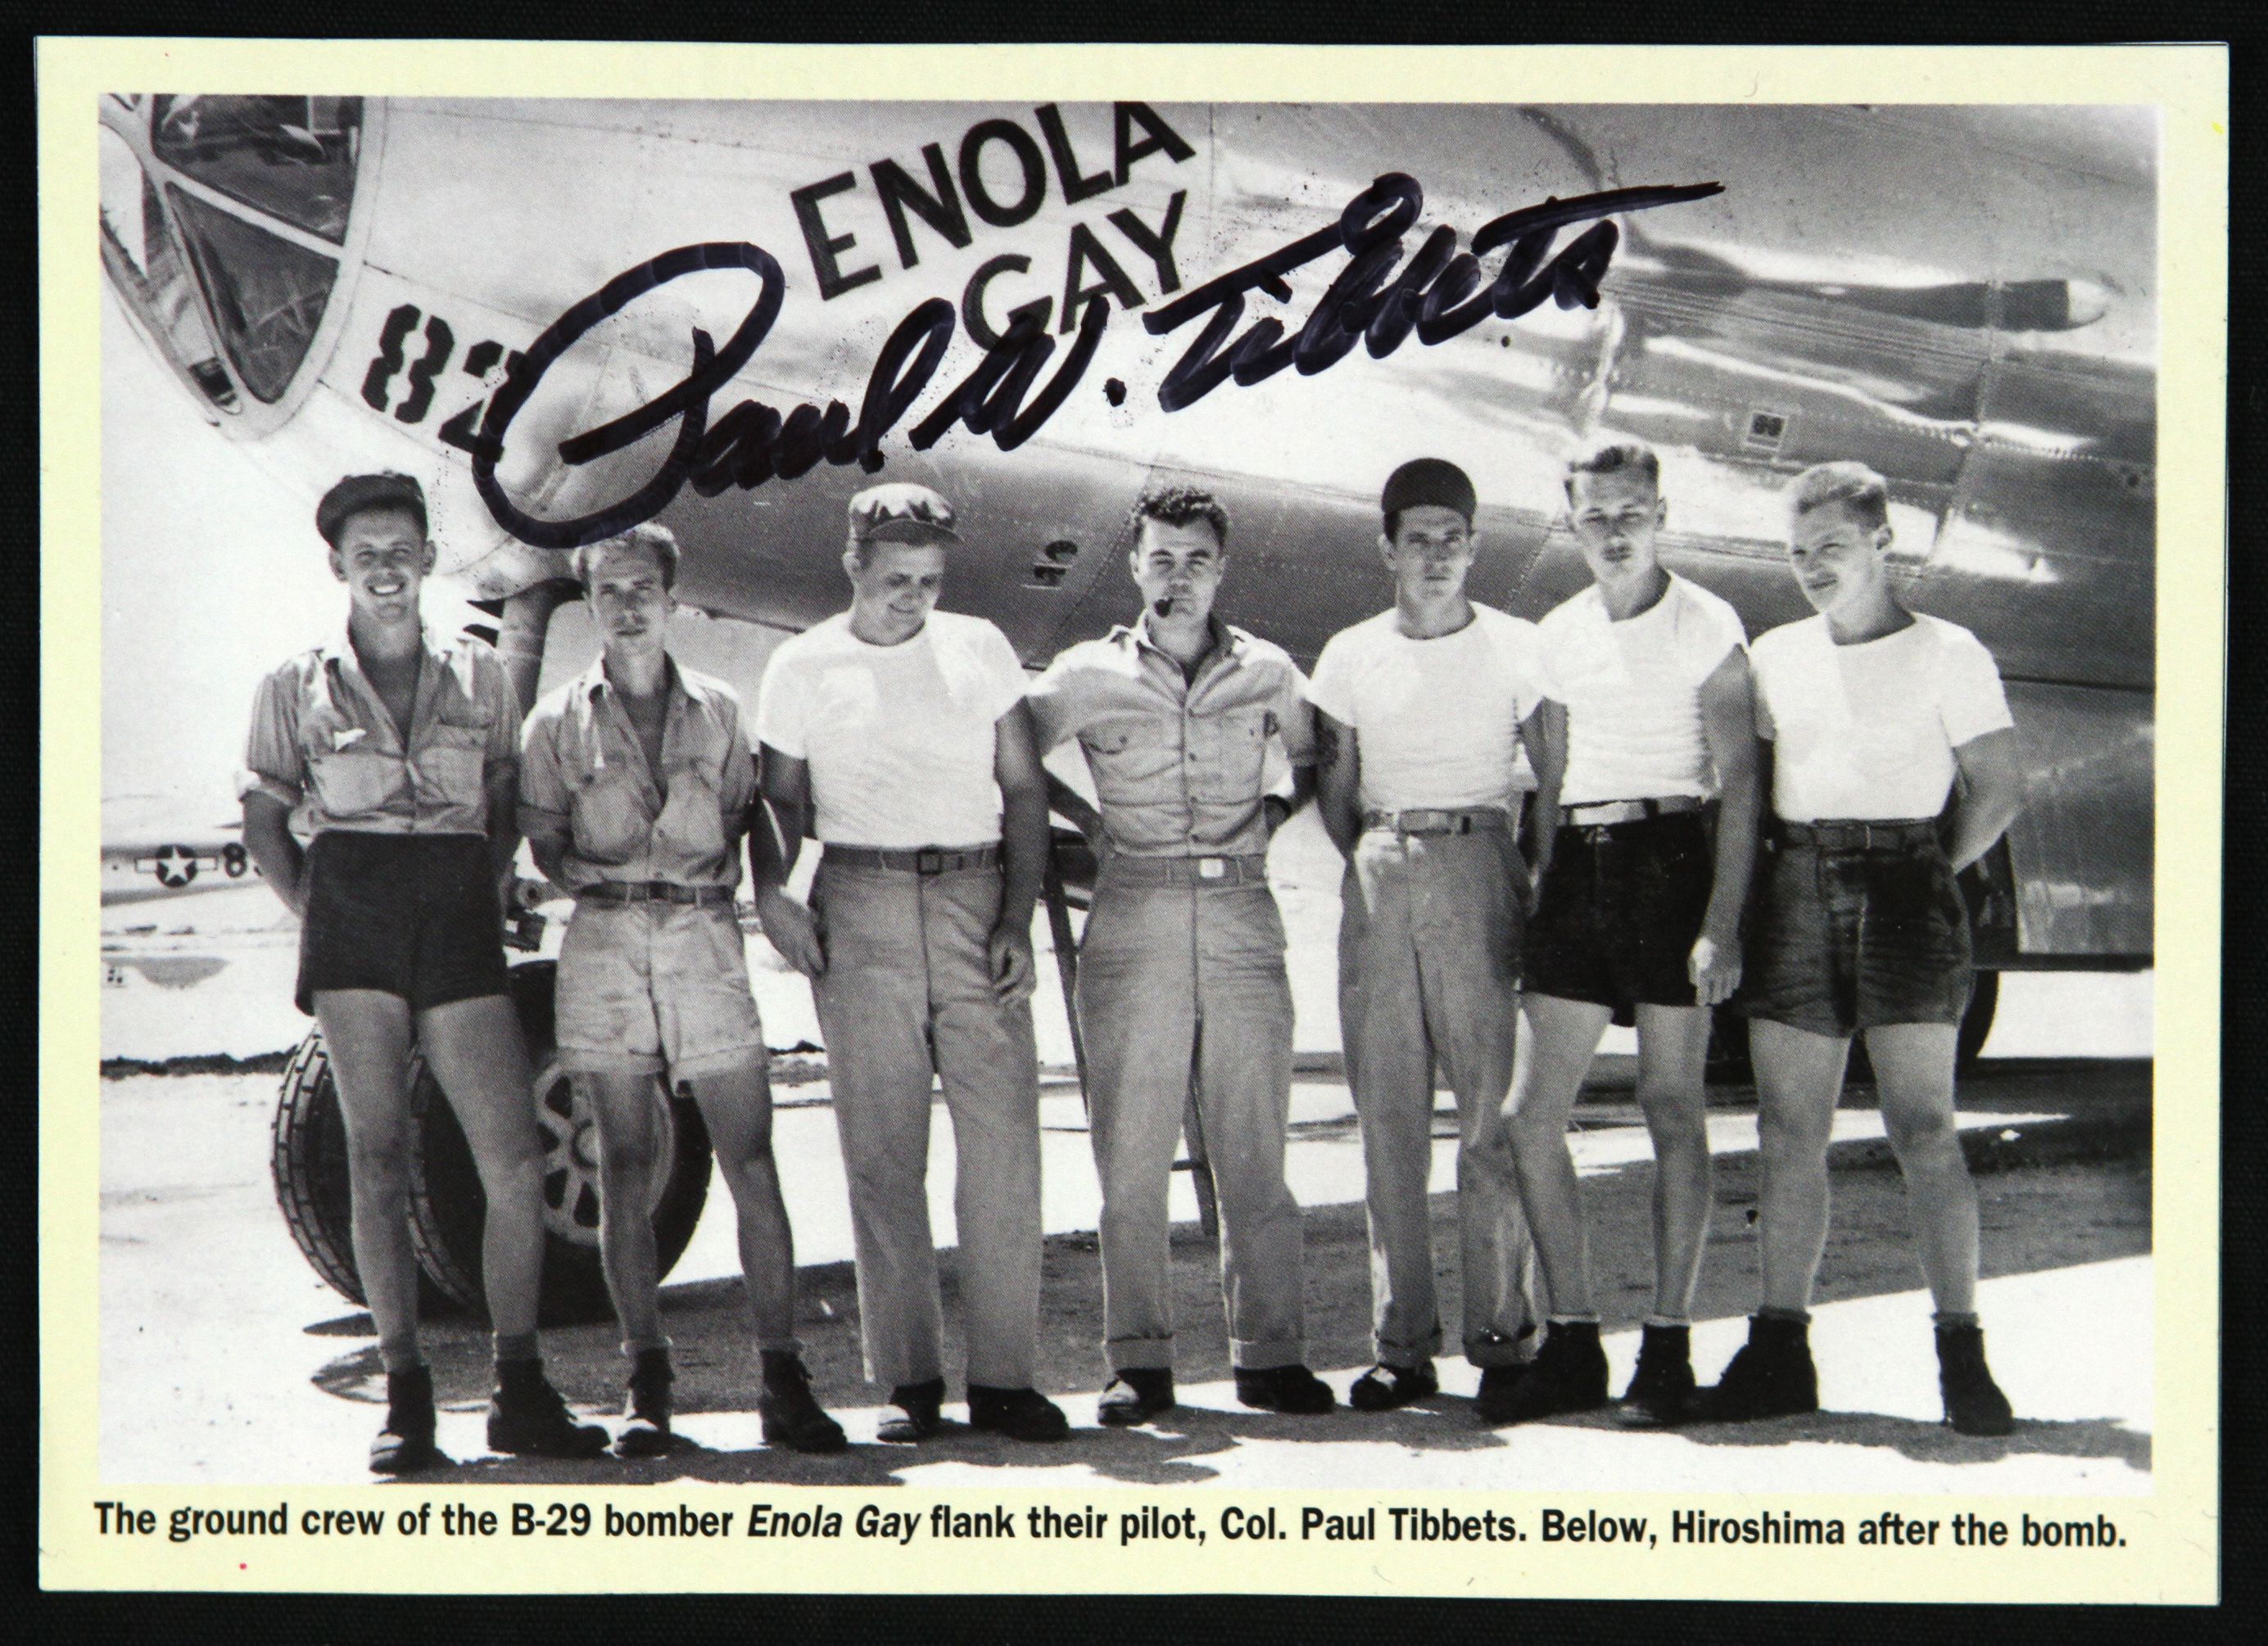 Thank you paul tibbets and the crew of the enola gay